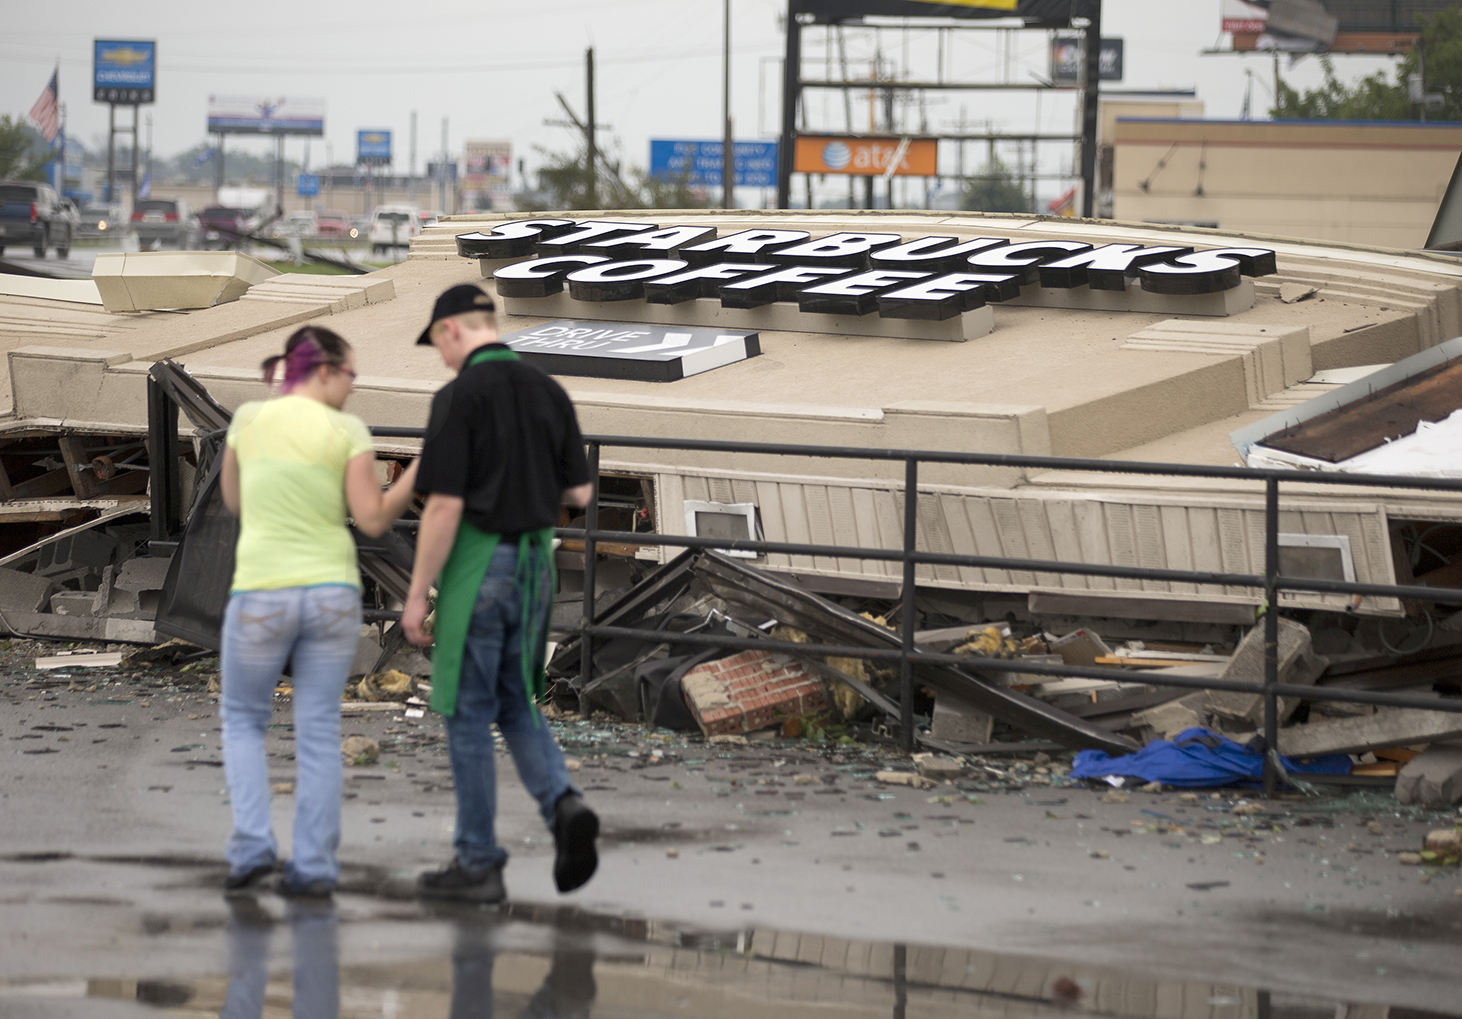 Authorities assess damage left by storms, tornadoes - The Blade